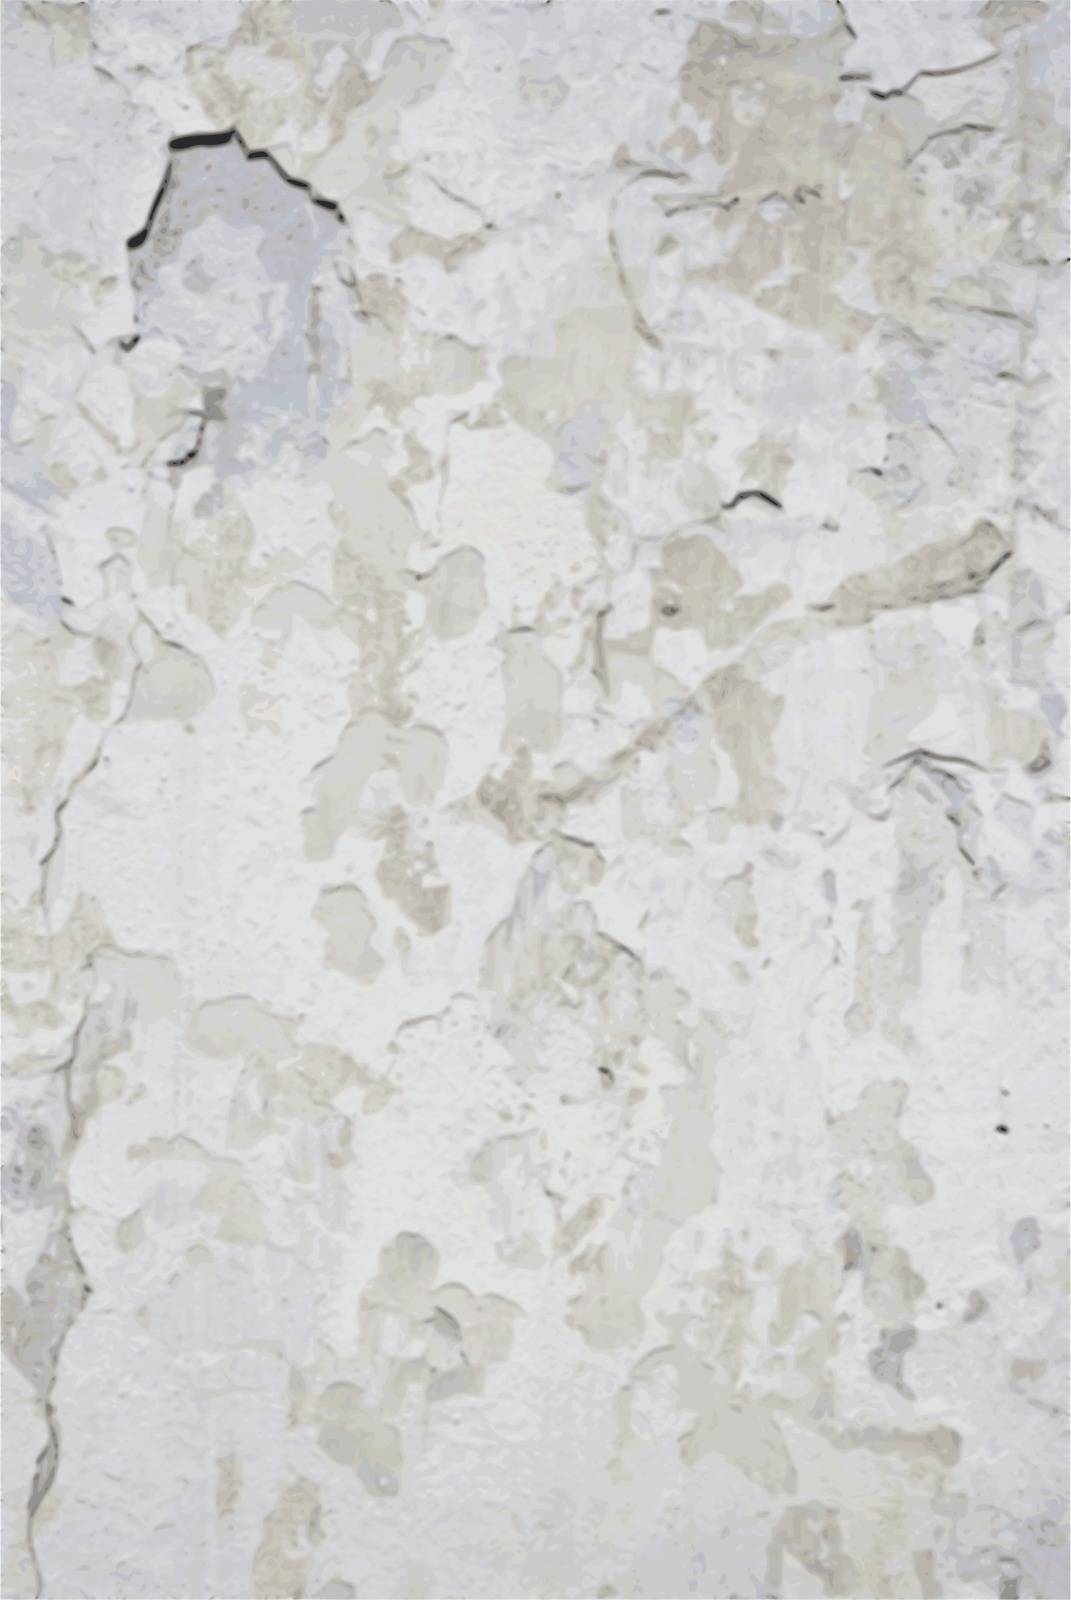 Vector Grungy White Concrete Wall Background by H2Oshka